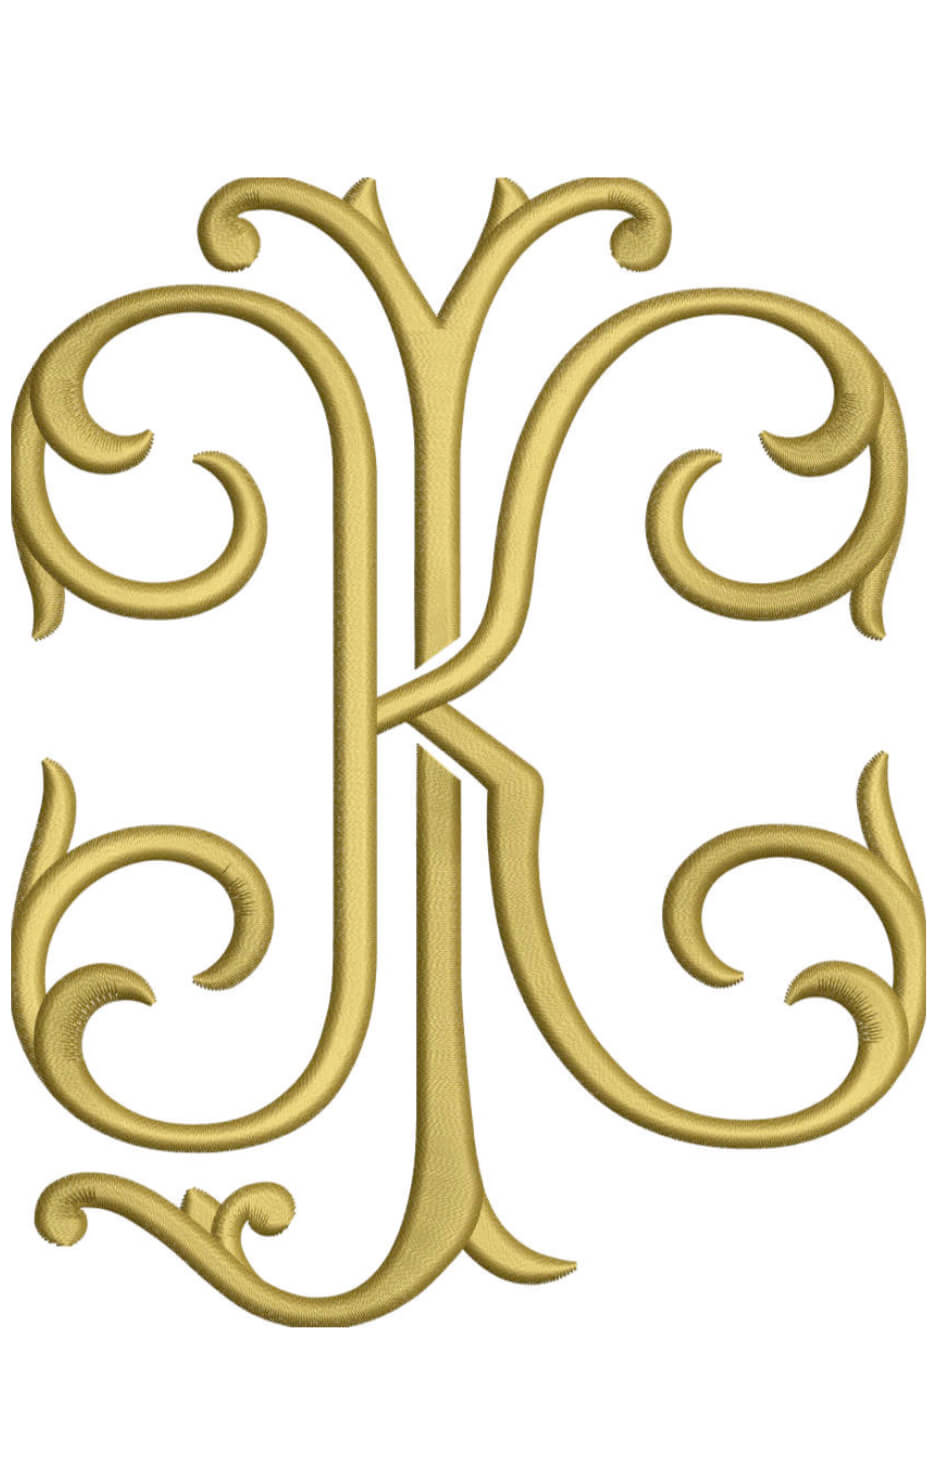 Monogram Couture JK for Embroidery